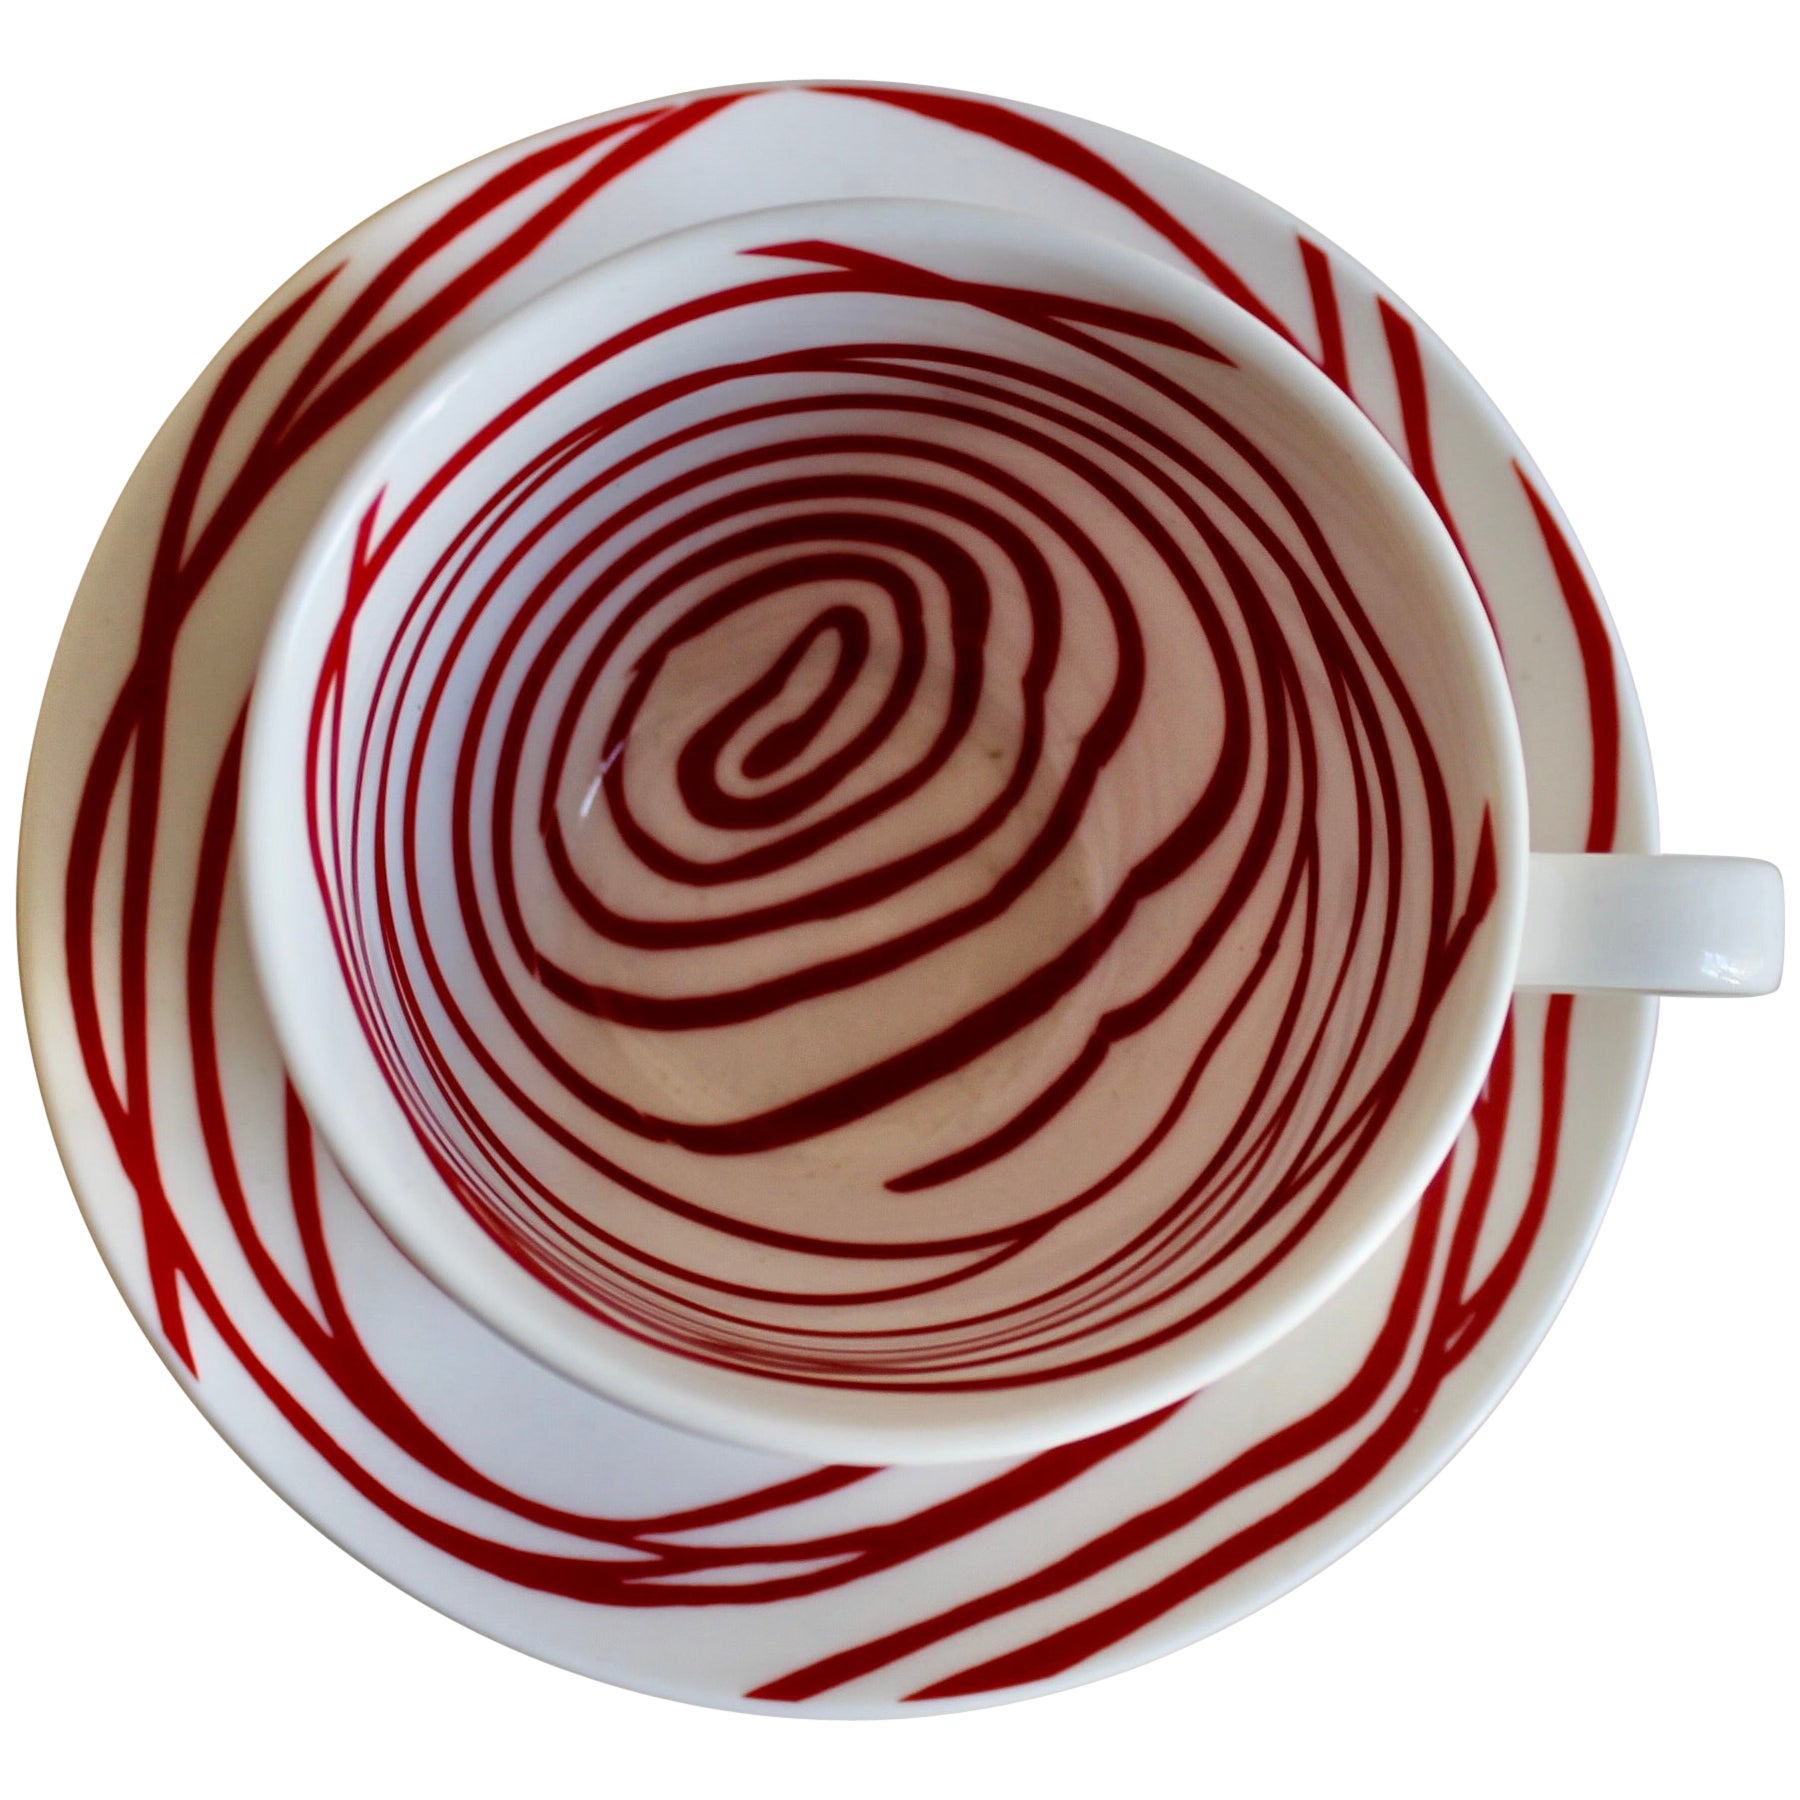 Louise Bourgeois Cup & Saucer for MOMA For Sale